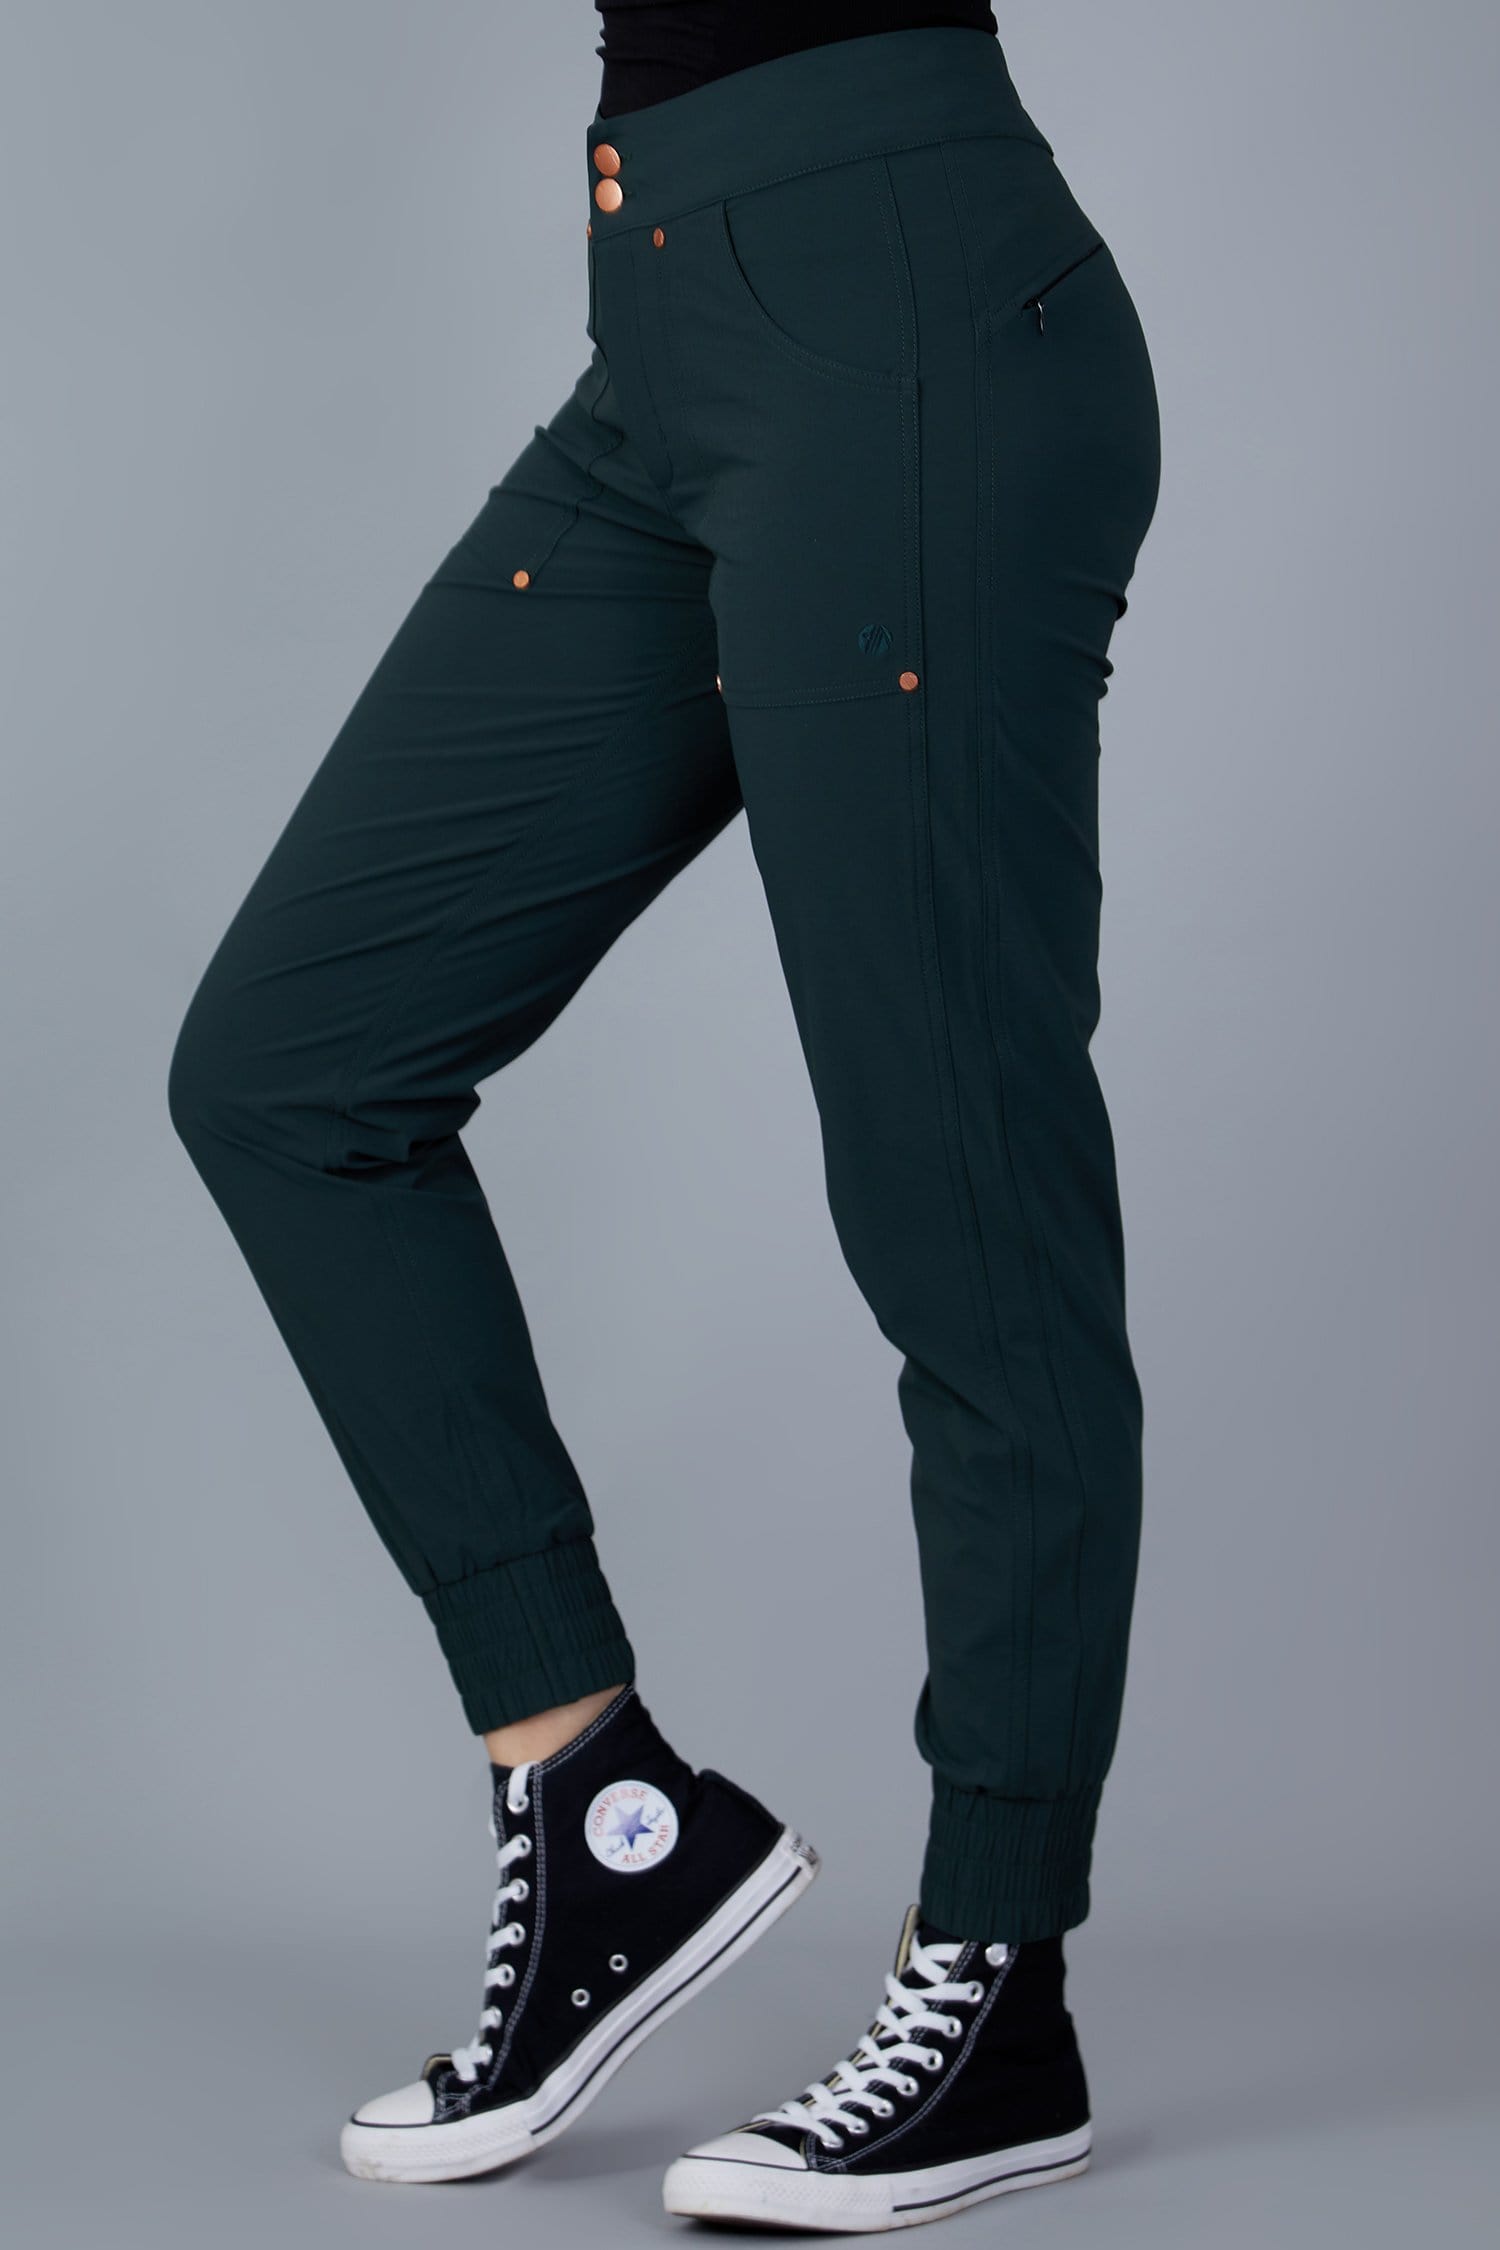 Casual Stroll Pants - Forest Green - 28l / Uk10 - Womens - Acai Outdoorwear